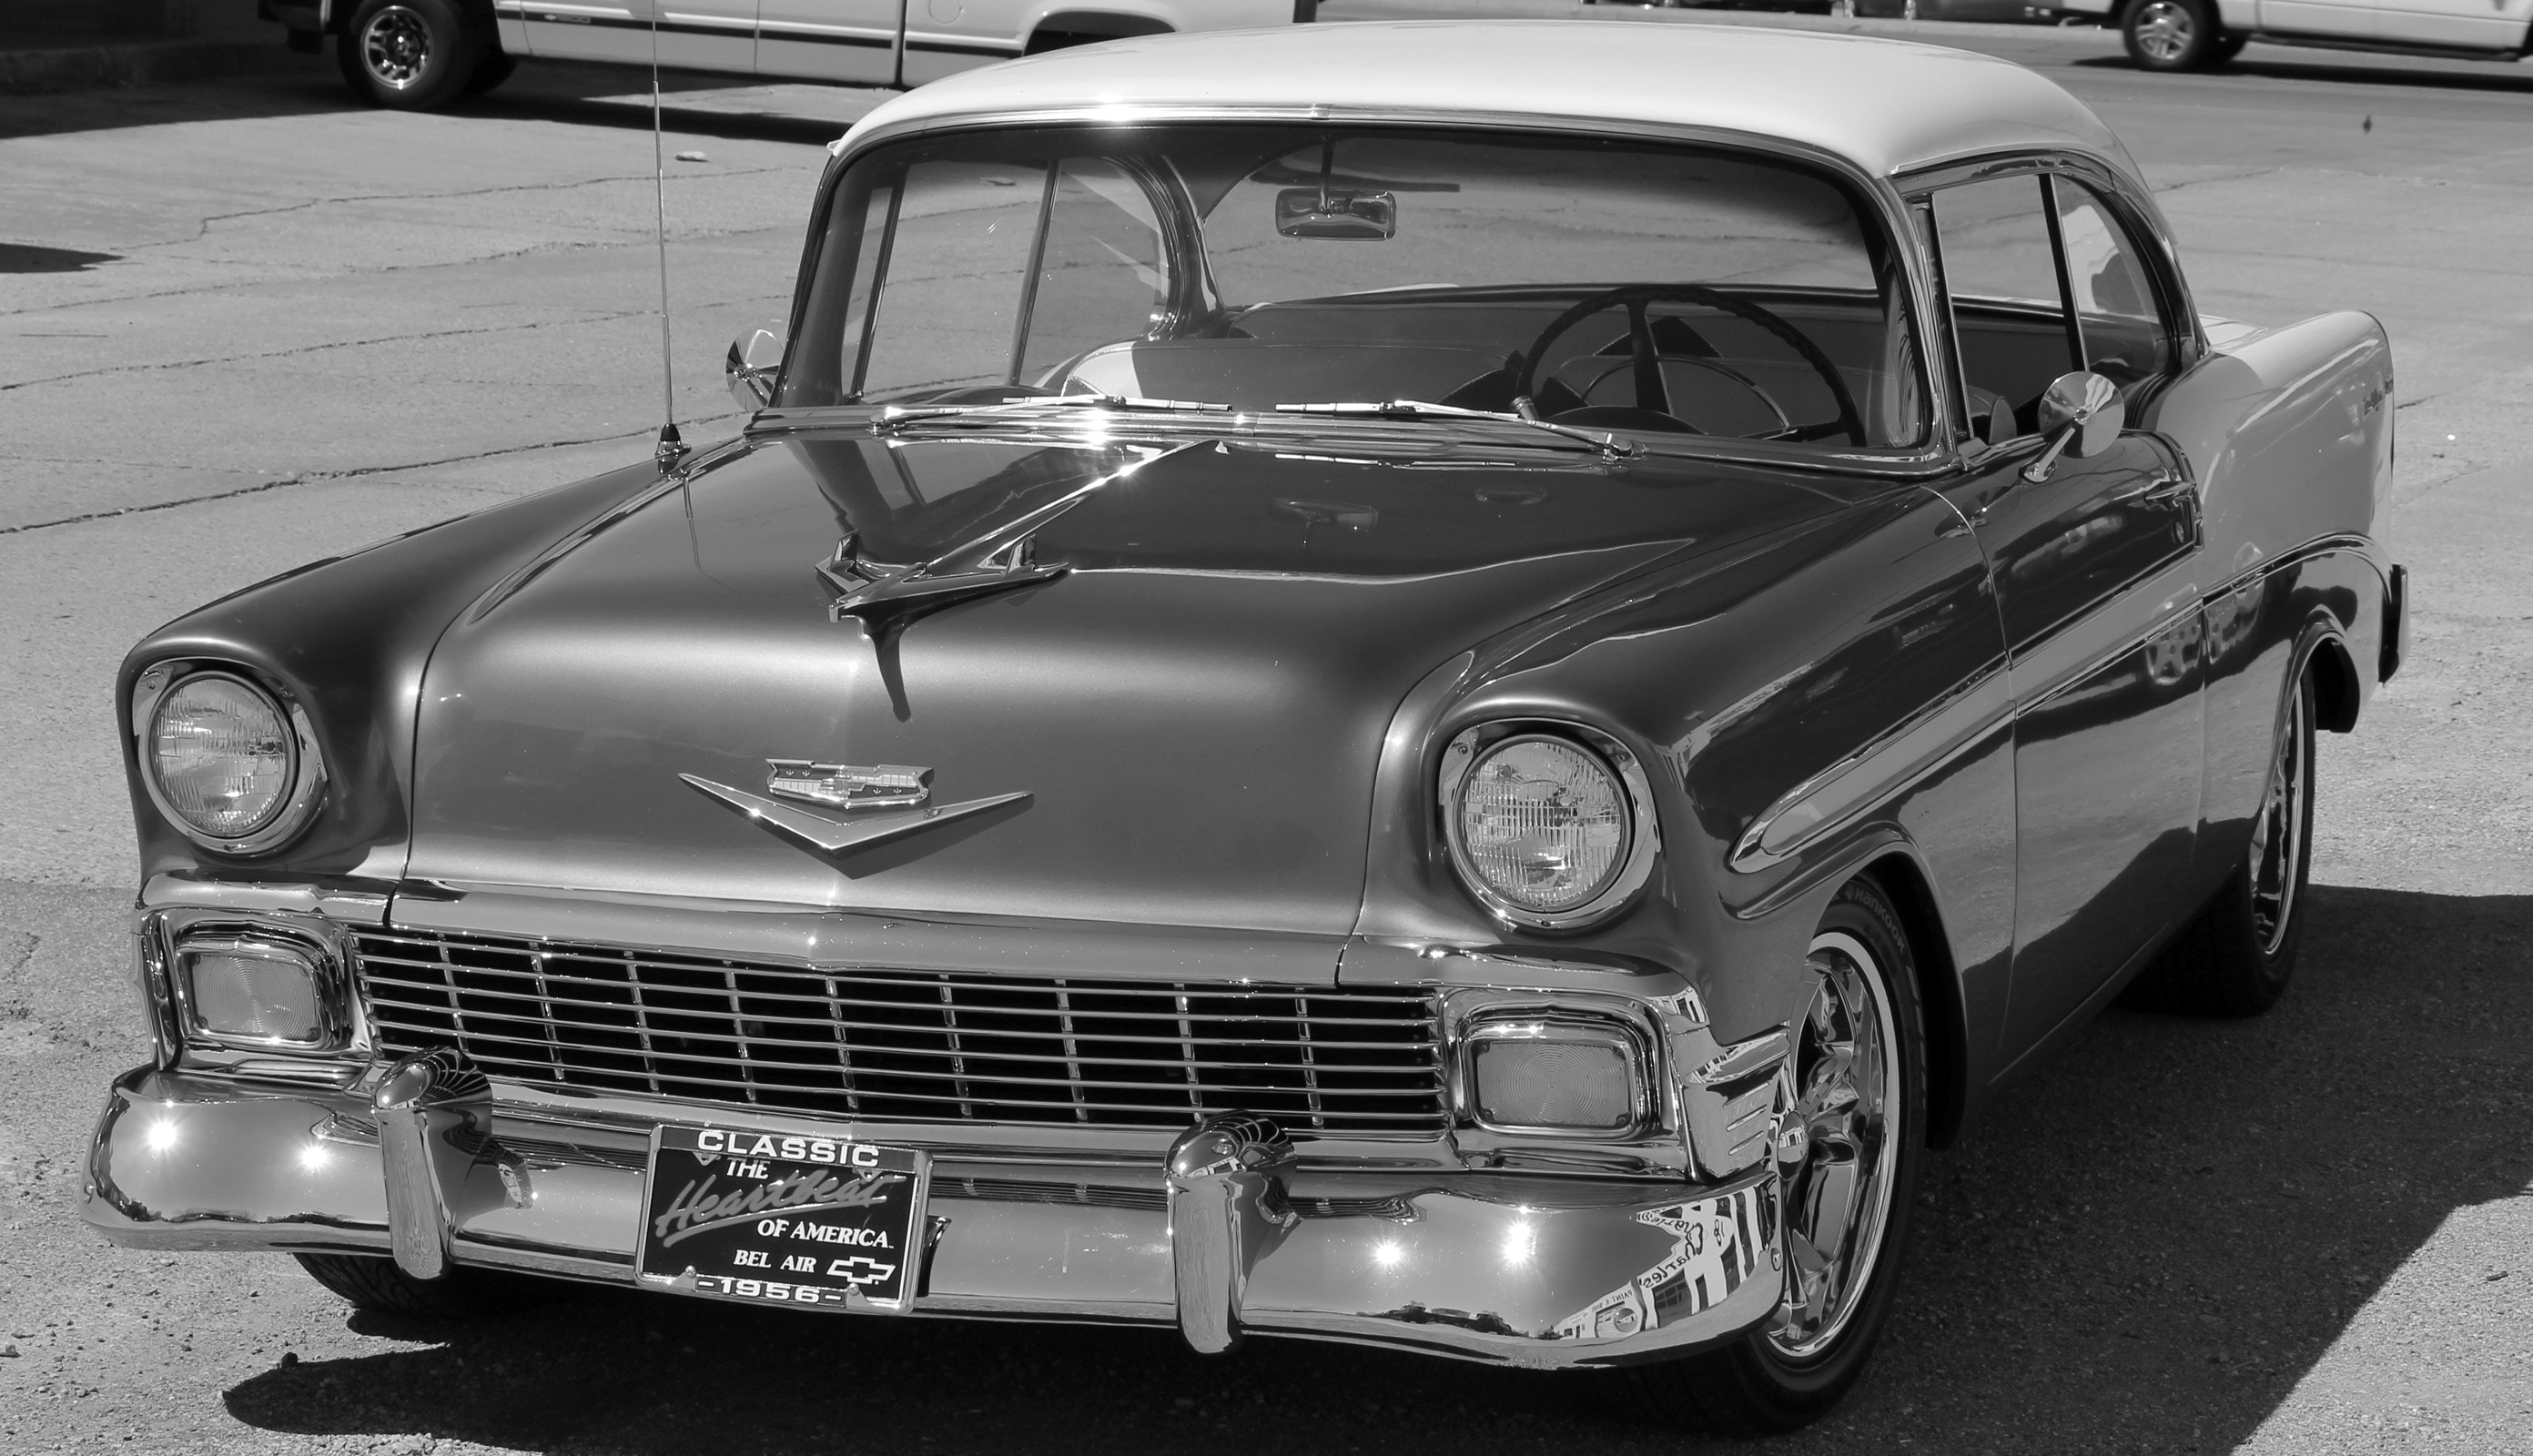 Chevrolet, Classic, 1956, Chevy, Bel Air, car, old-fashioned